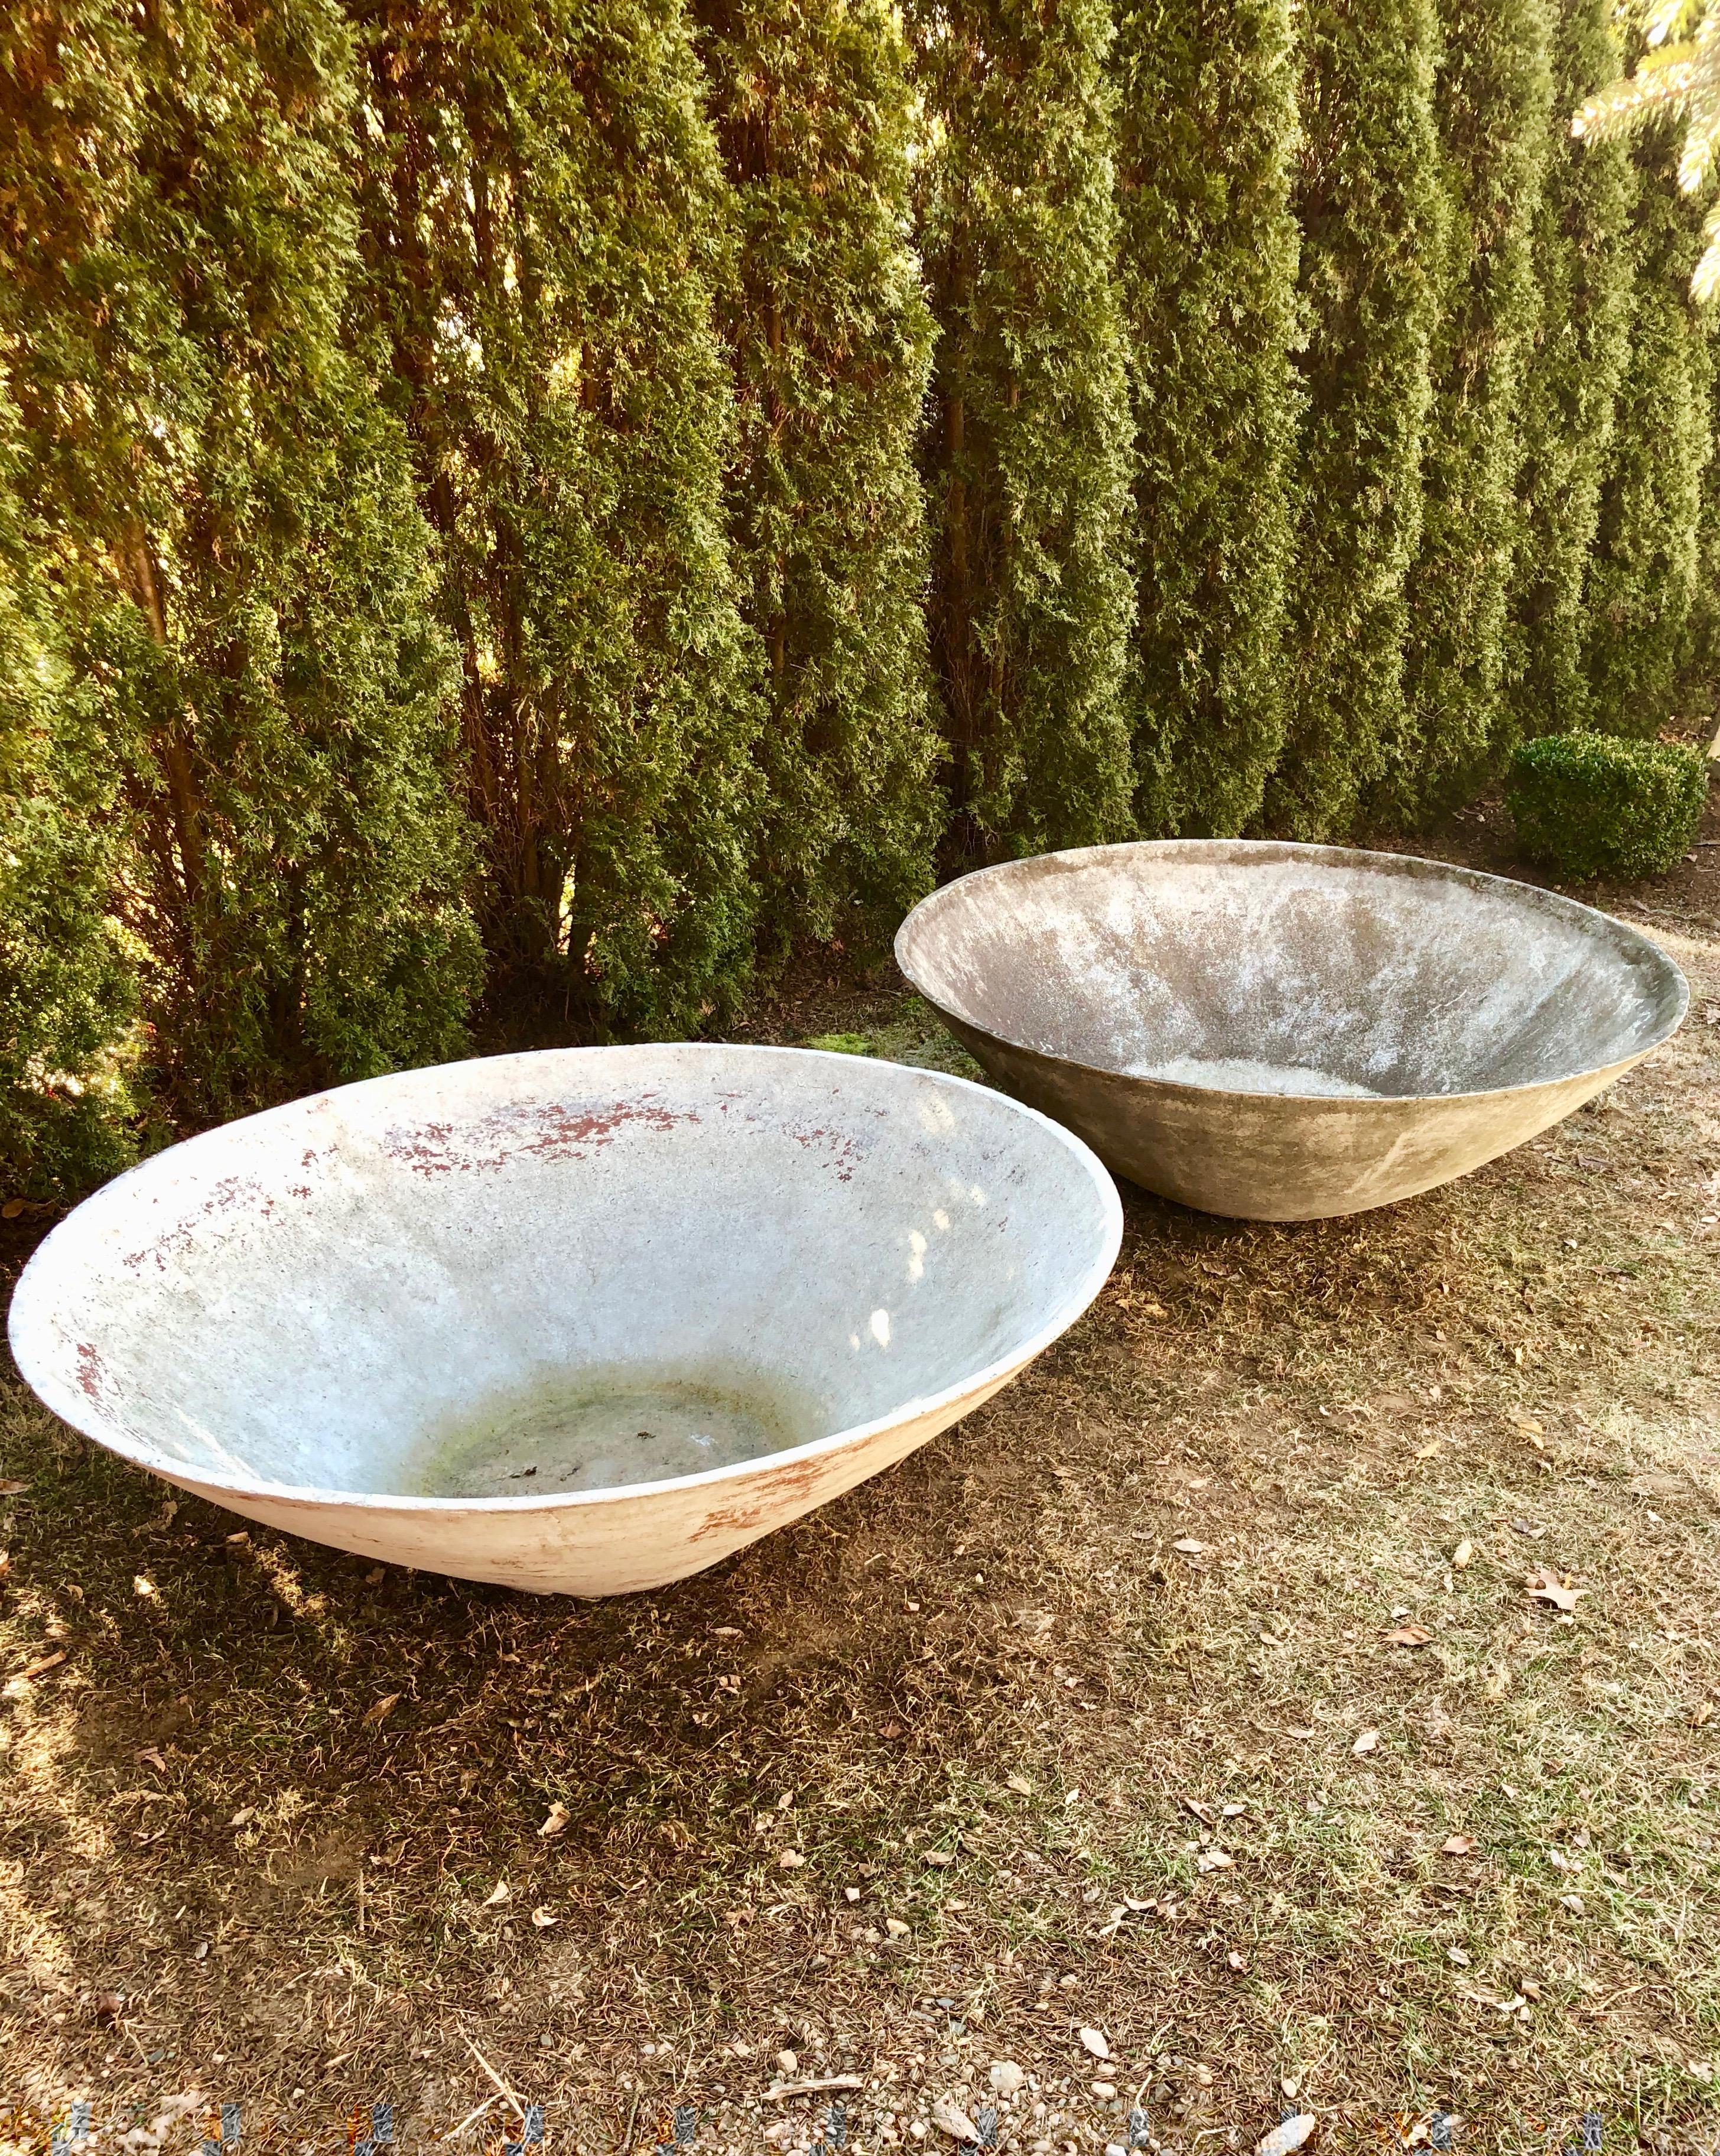 Swiss Enormous Eternit Canted Bowl Planter Designed by Willy Guhl #2 For Sale